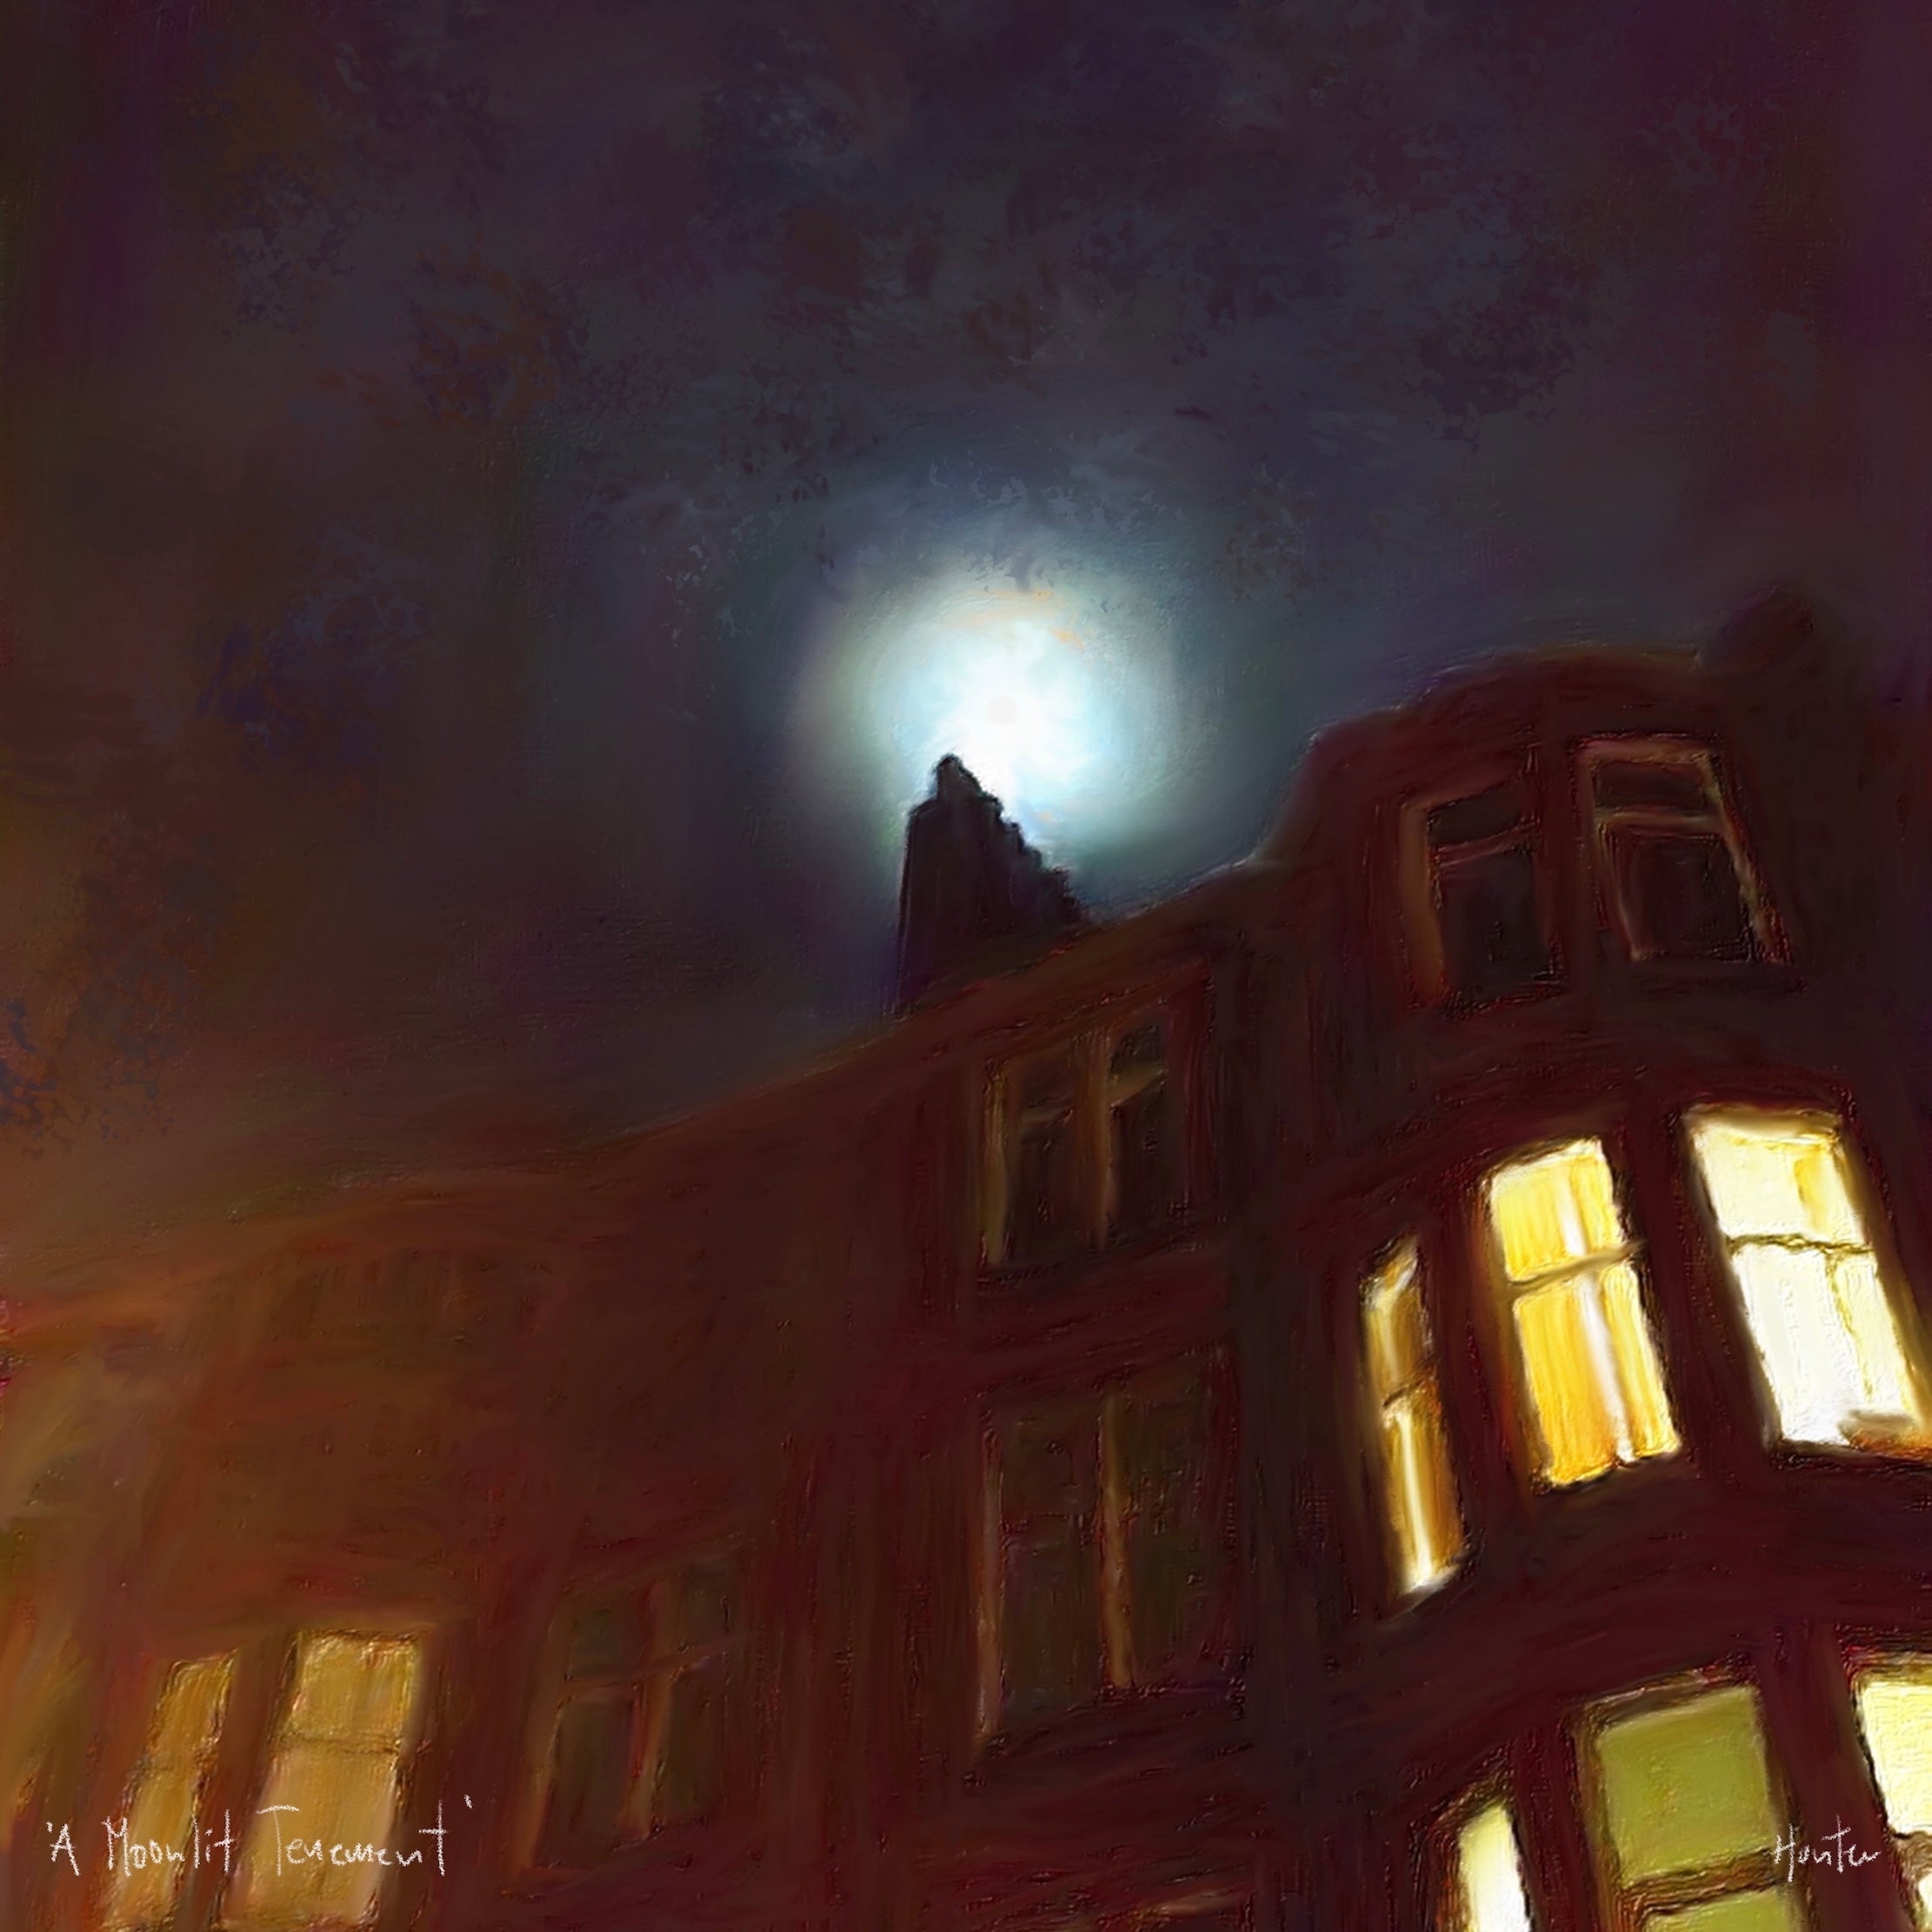 A Moonlit Tenement | Scotland In Your Pocket Art Print-Scotland In Your Pocket Framed Prints-Edinburgh & Glasgow Art Gallery-Mounted & Cello Bag: 12.5x12.5 cm-Black Frame-Paintings, Prints, Homeware, Art Gifts From Scotland By Scottish Artist Kevin Hunter